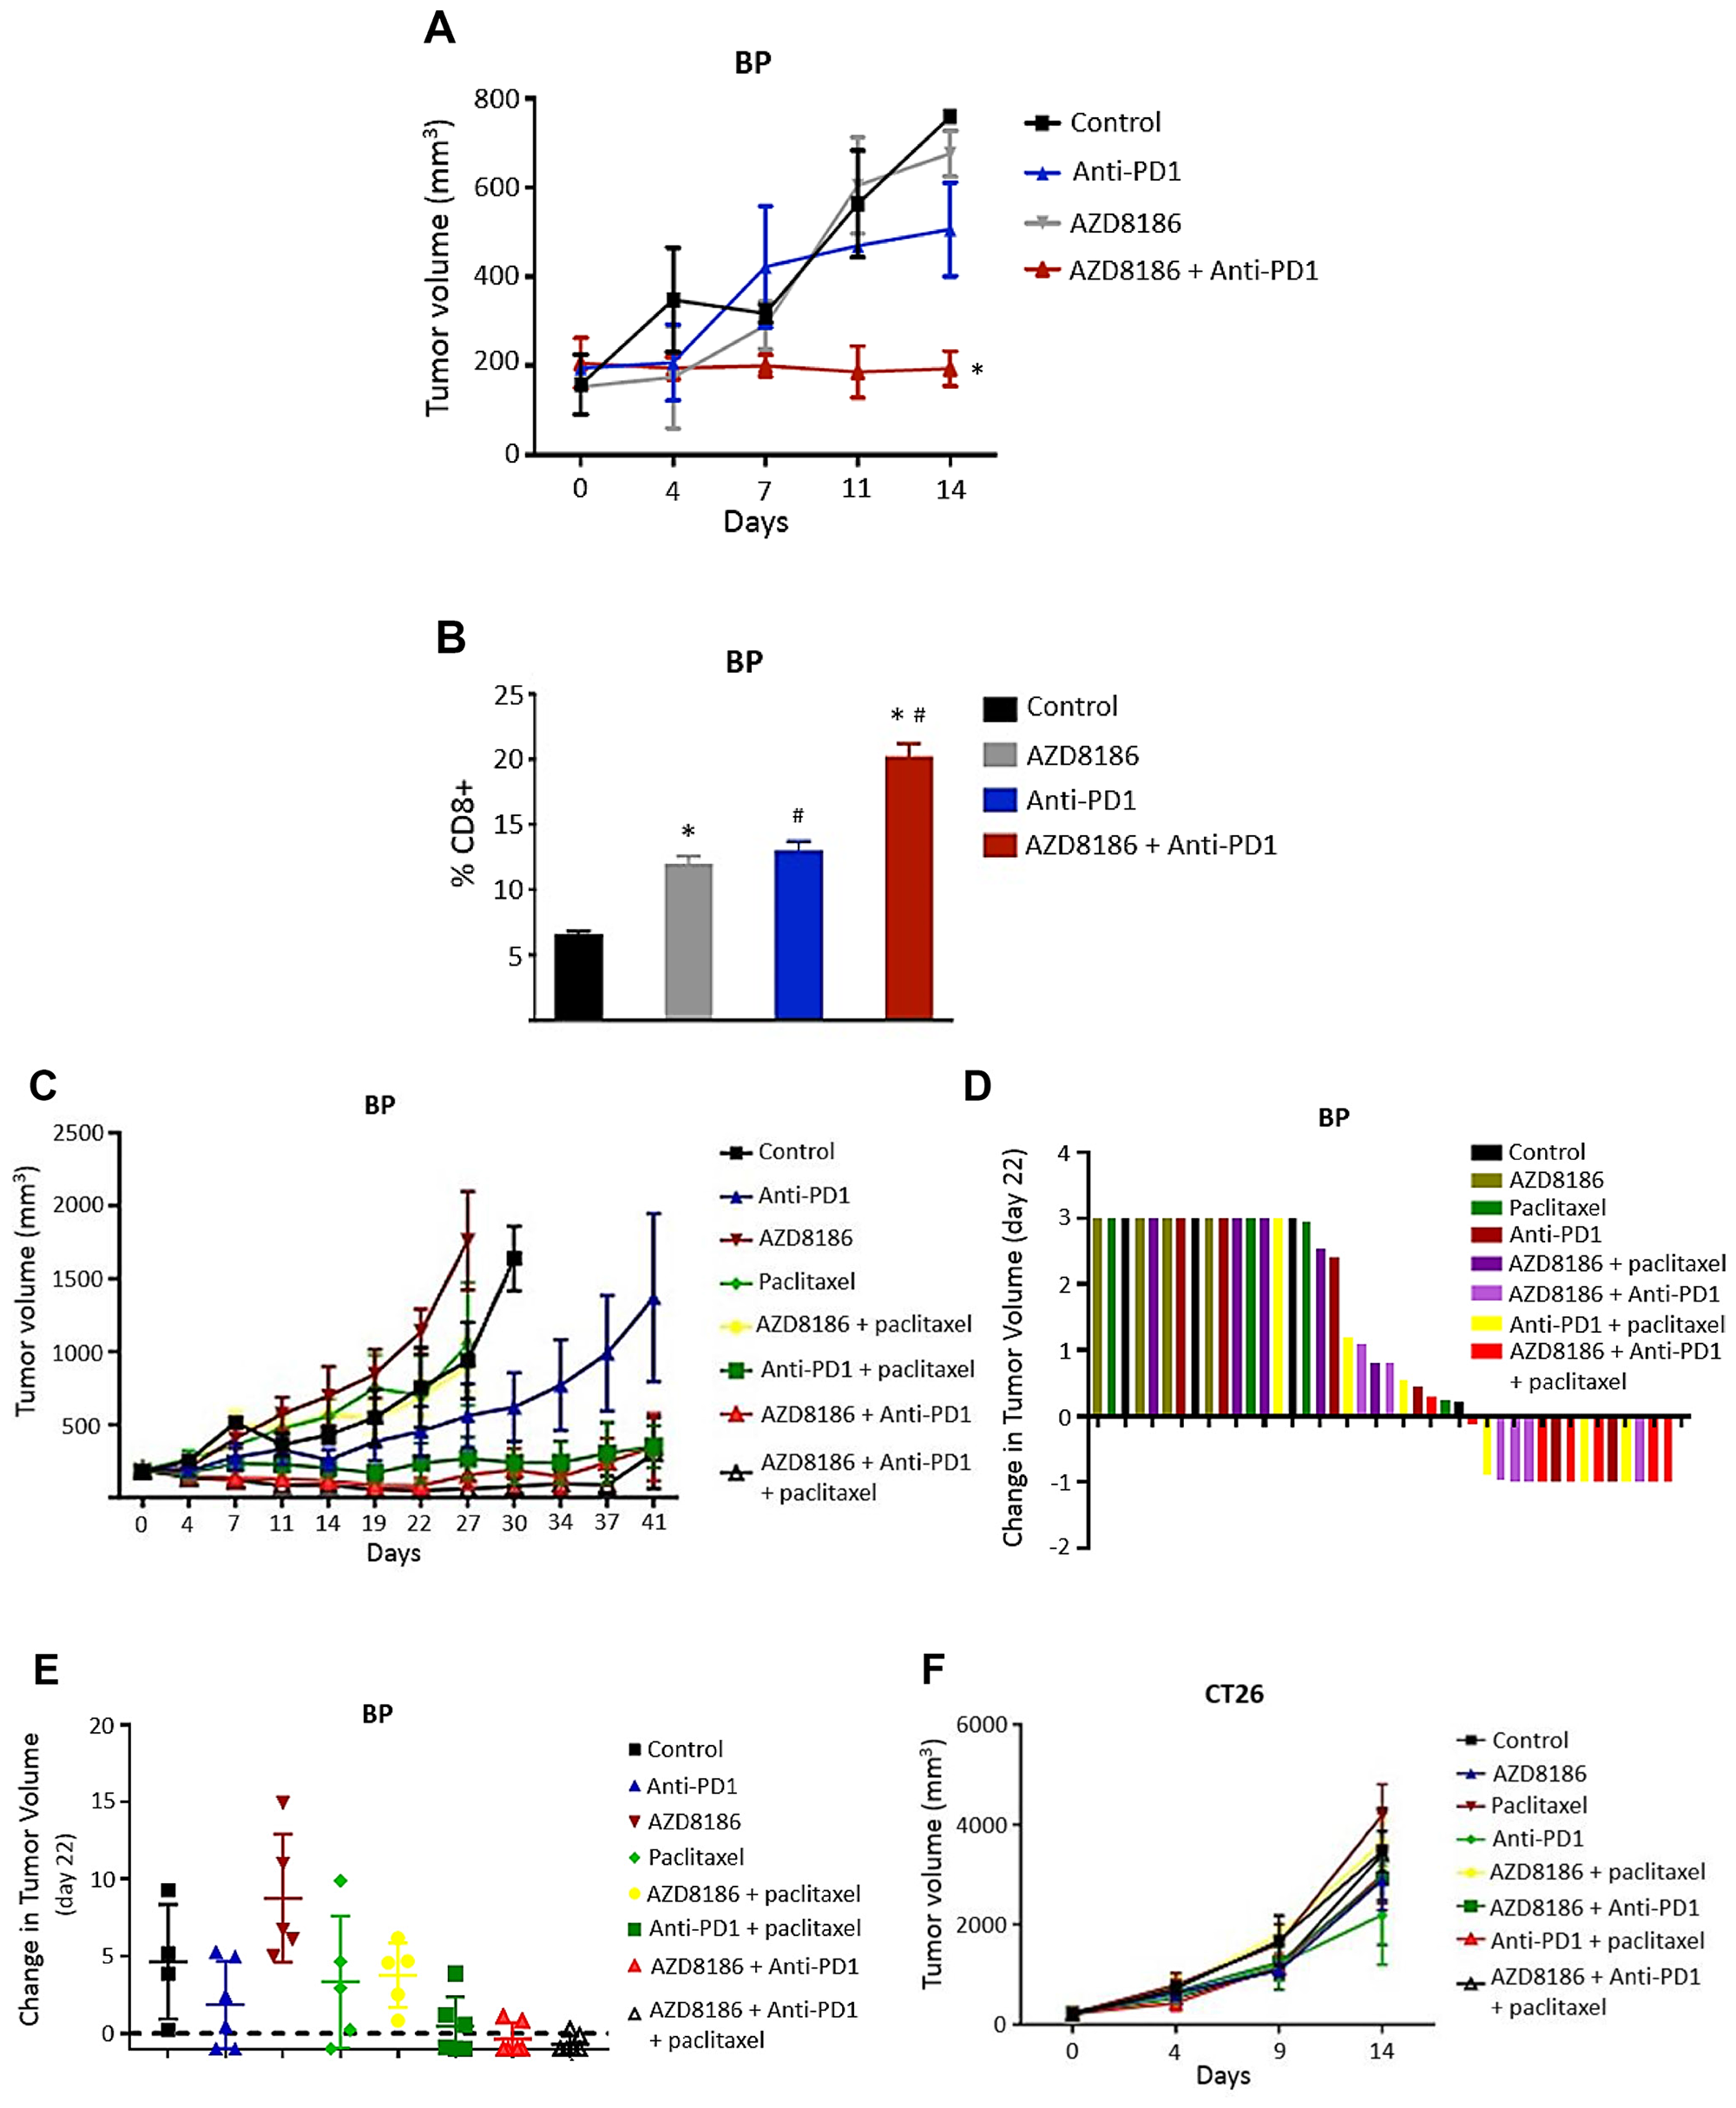 Effects of AZD8186 in combination with anti-PD1 on syngeneic models.